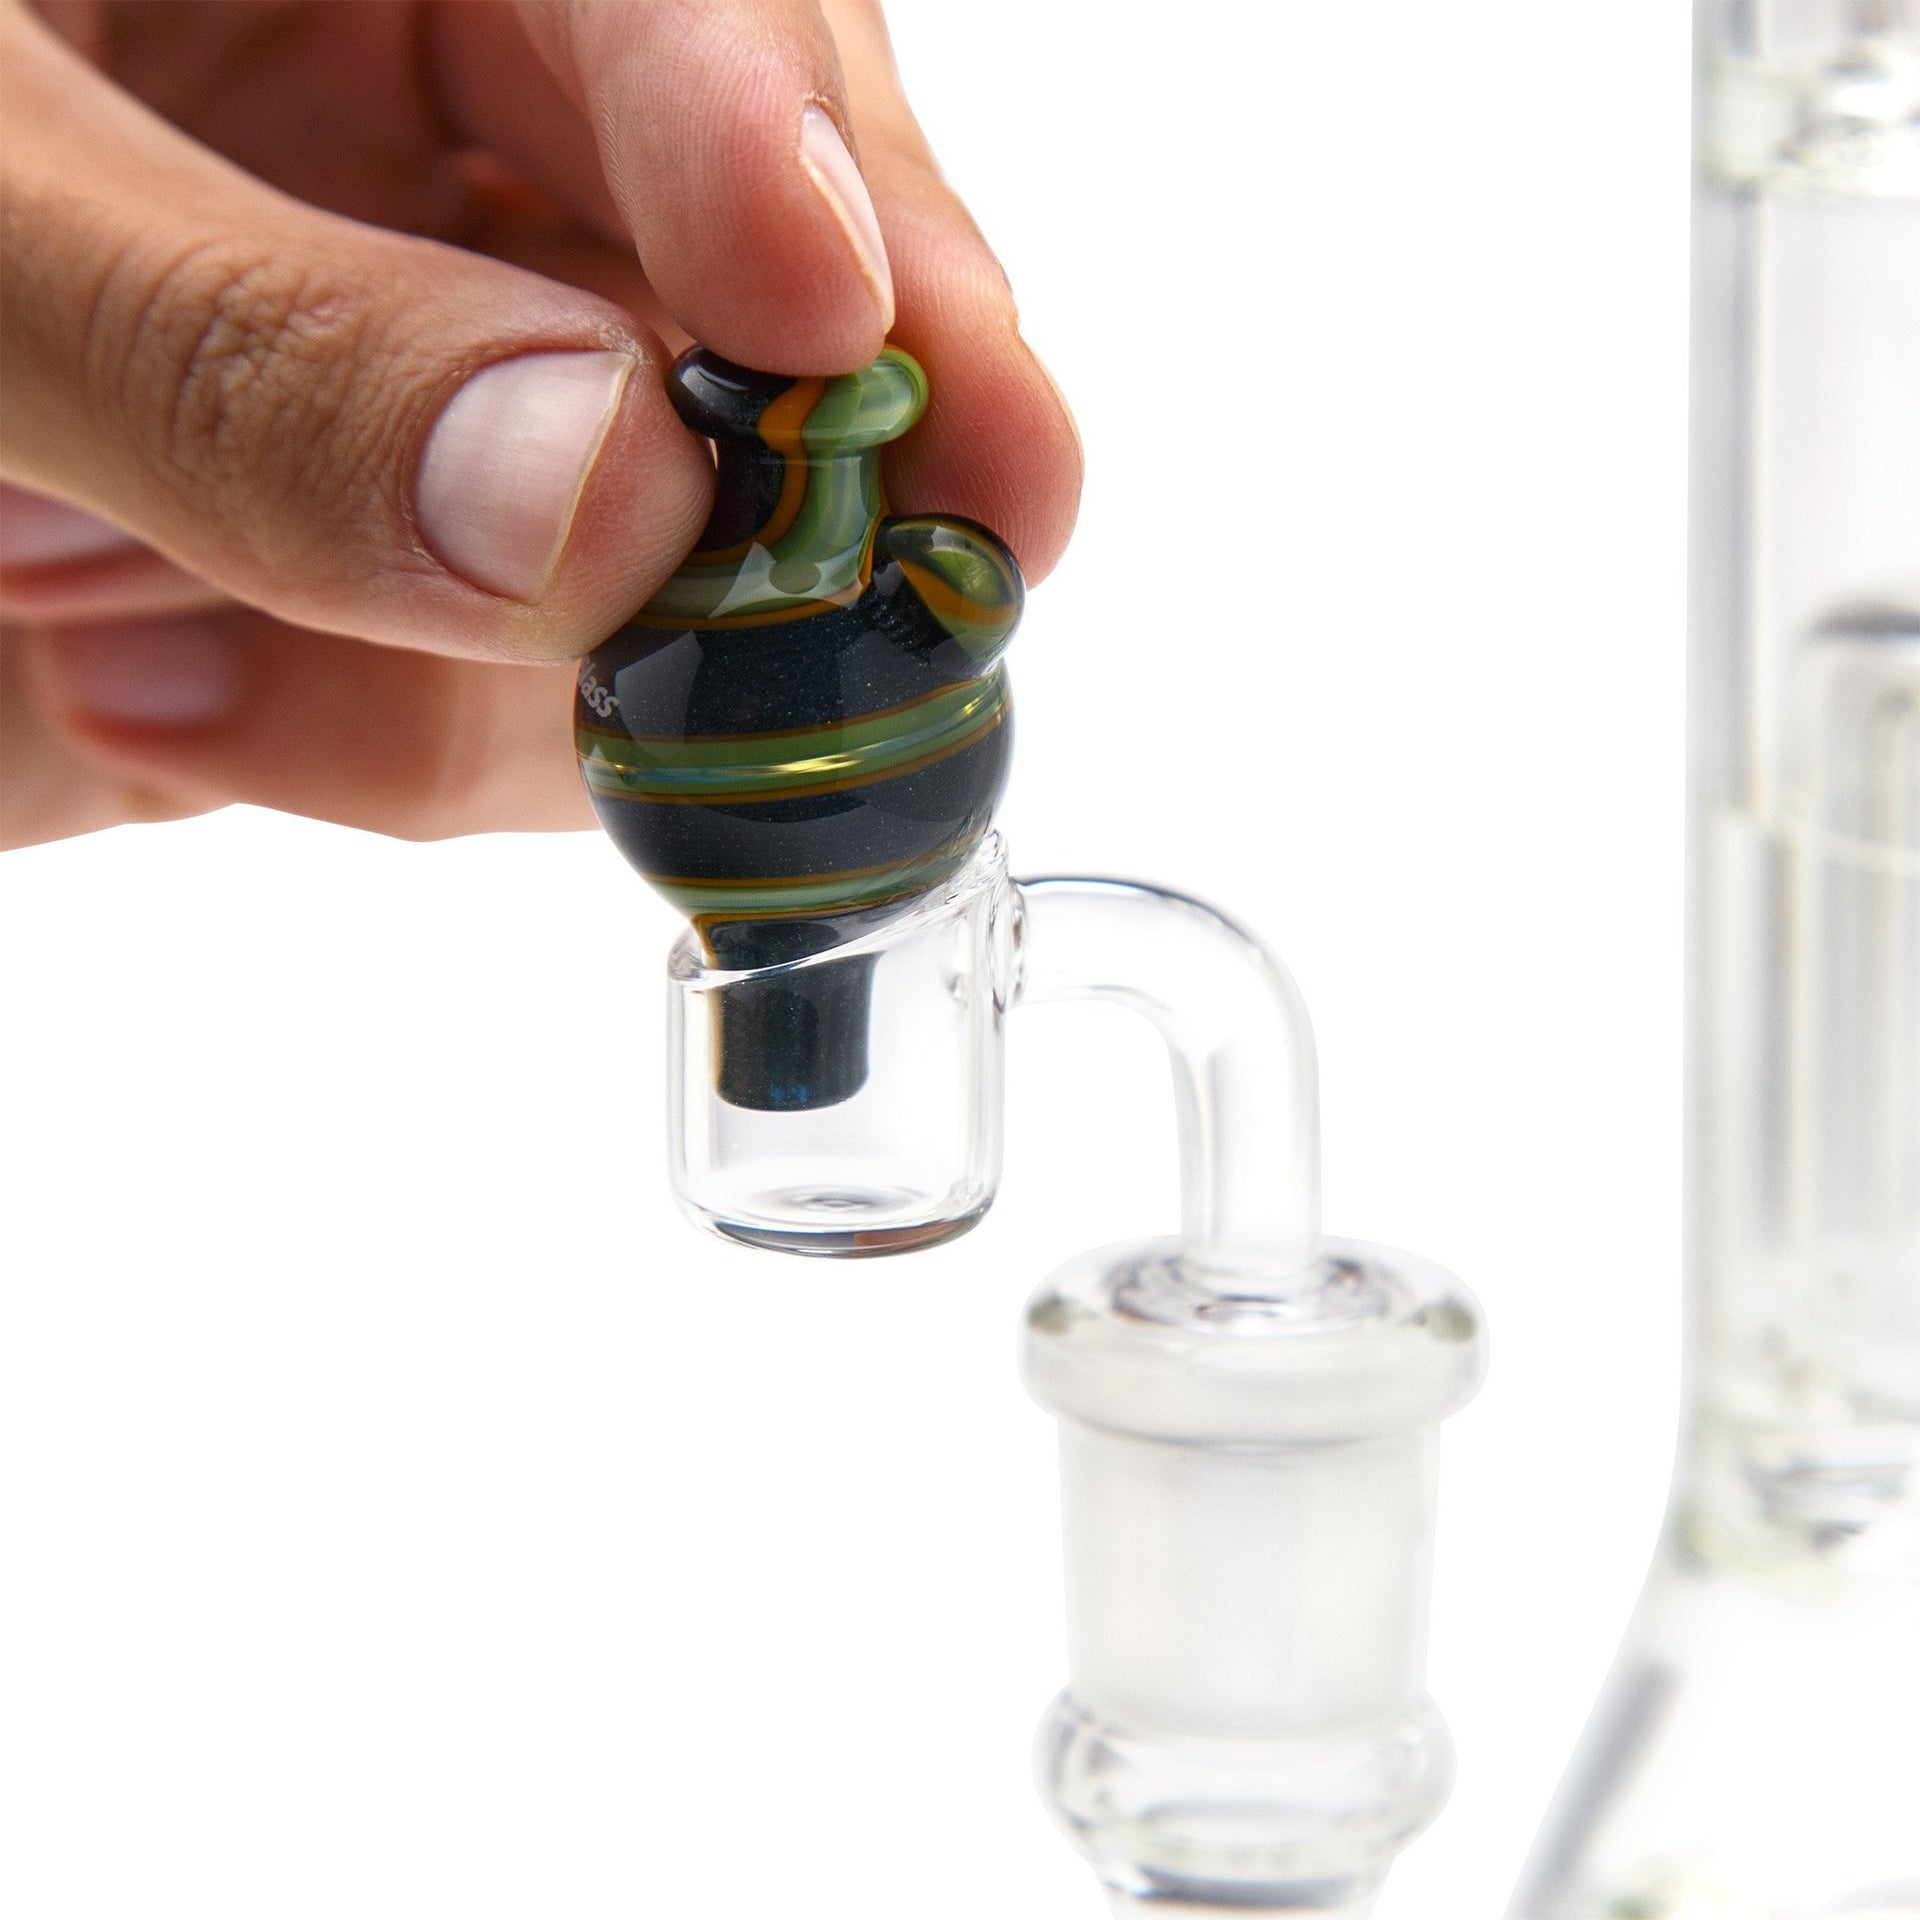 Home Blown Glass Bubble Carb Cap - Rainbow Swirl - 420 Science - The most trusted online smoke shop.